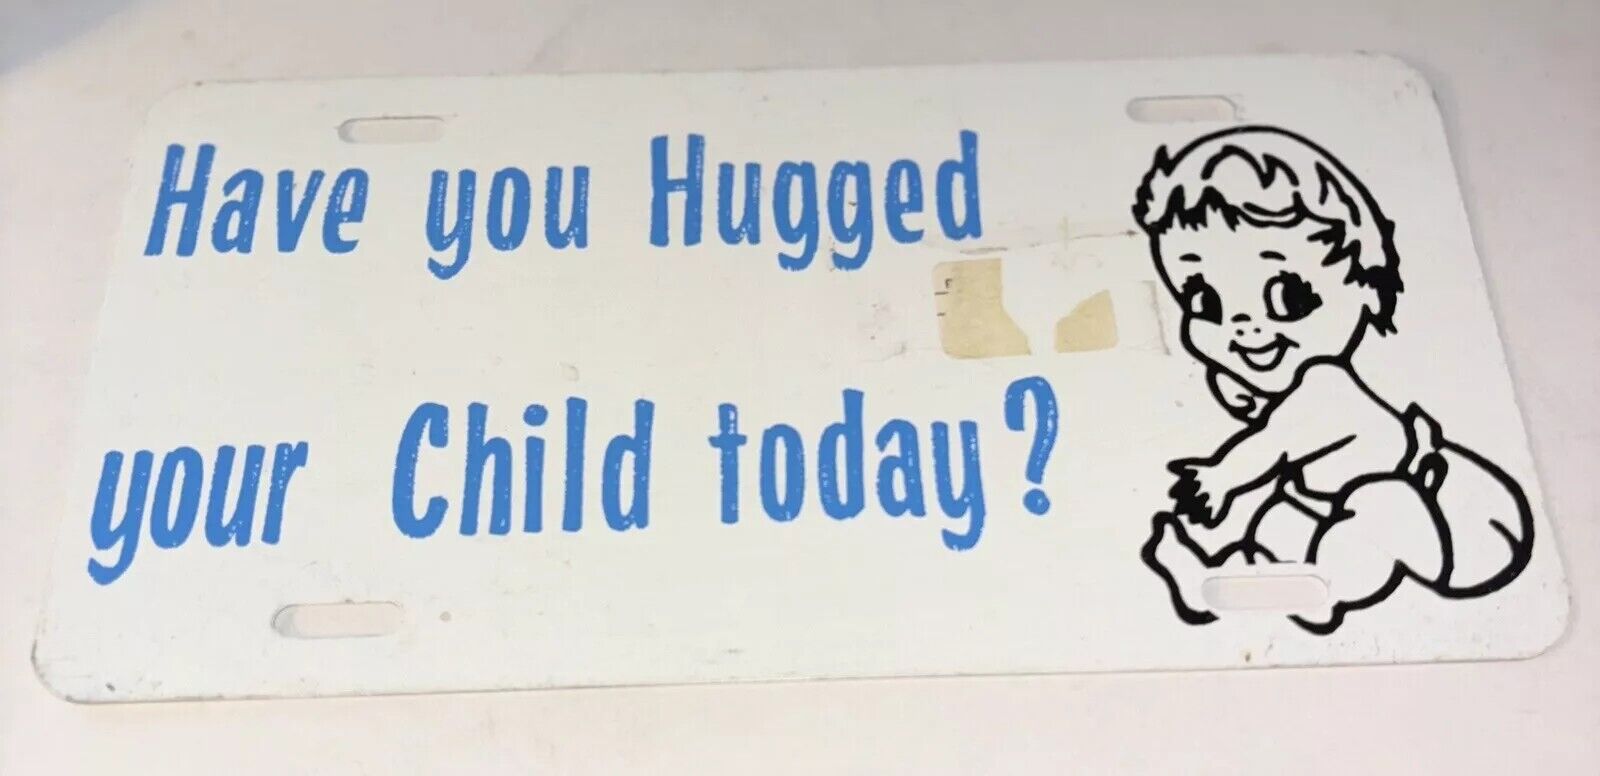 Vintage Have You Hugged Your Child Today Booster License Plate 70s 80s Metal